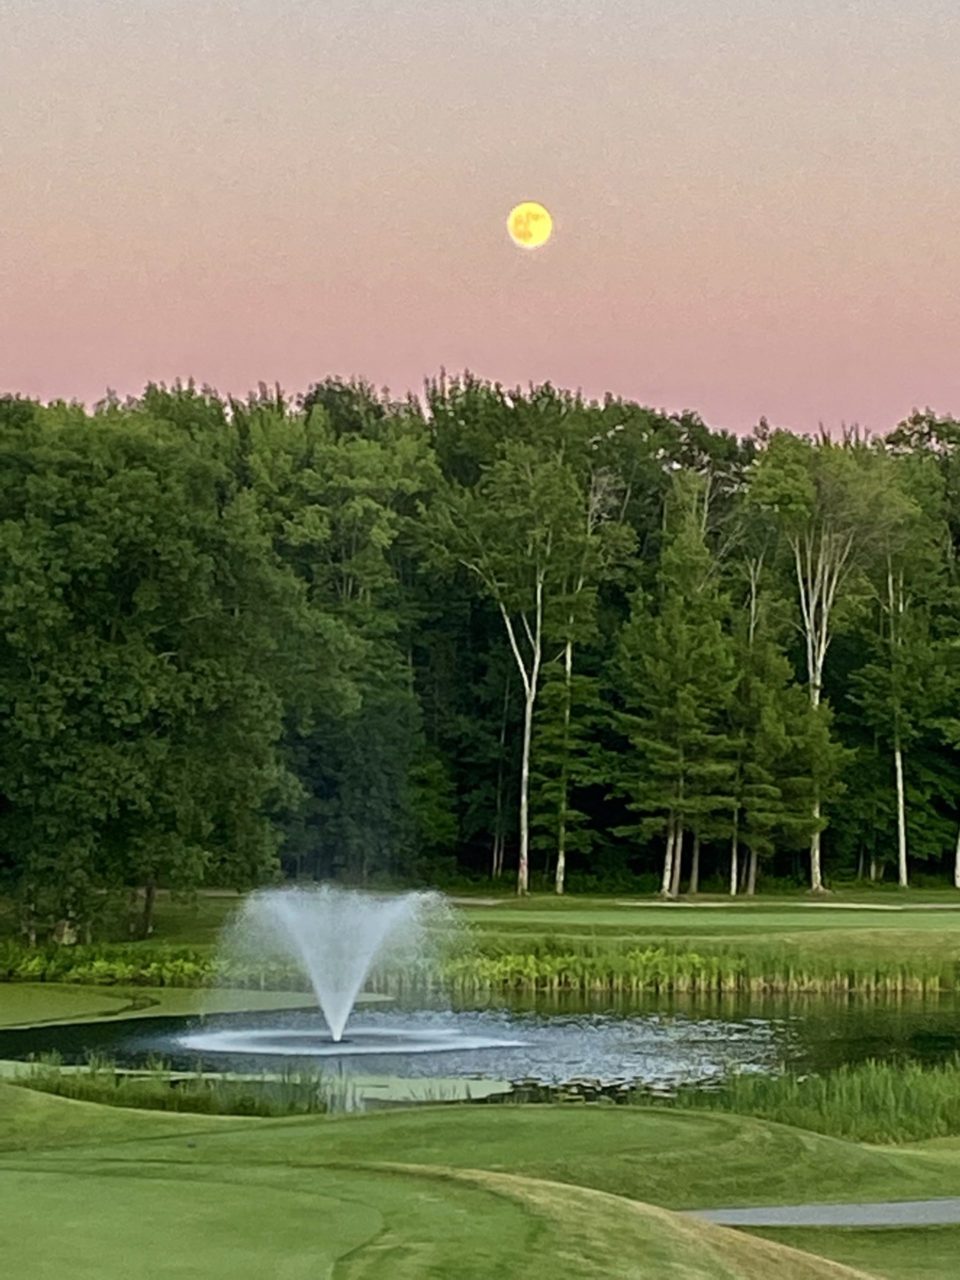 Water fountain on a golf course with full moon in background